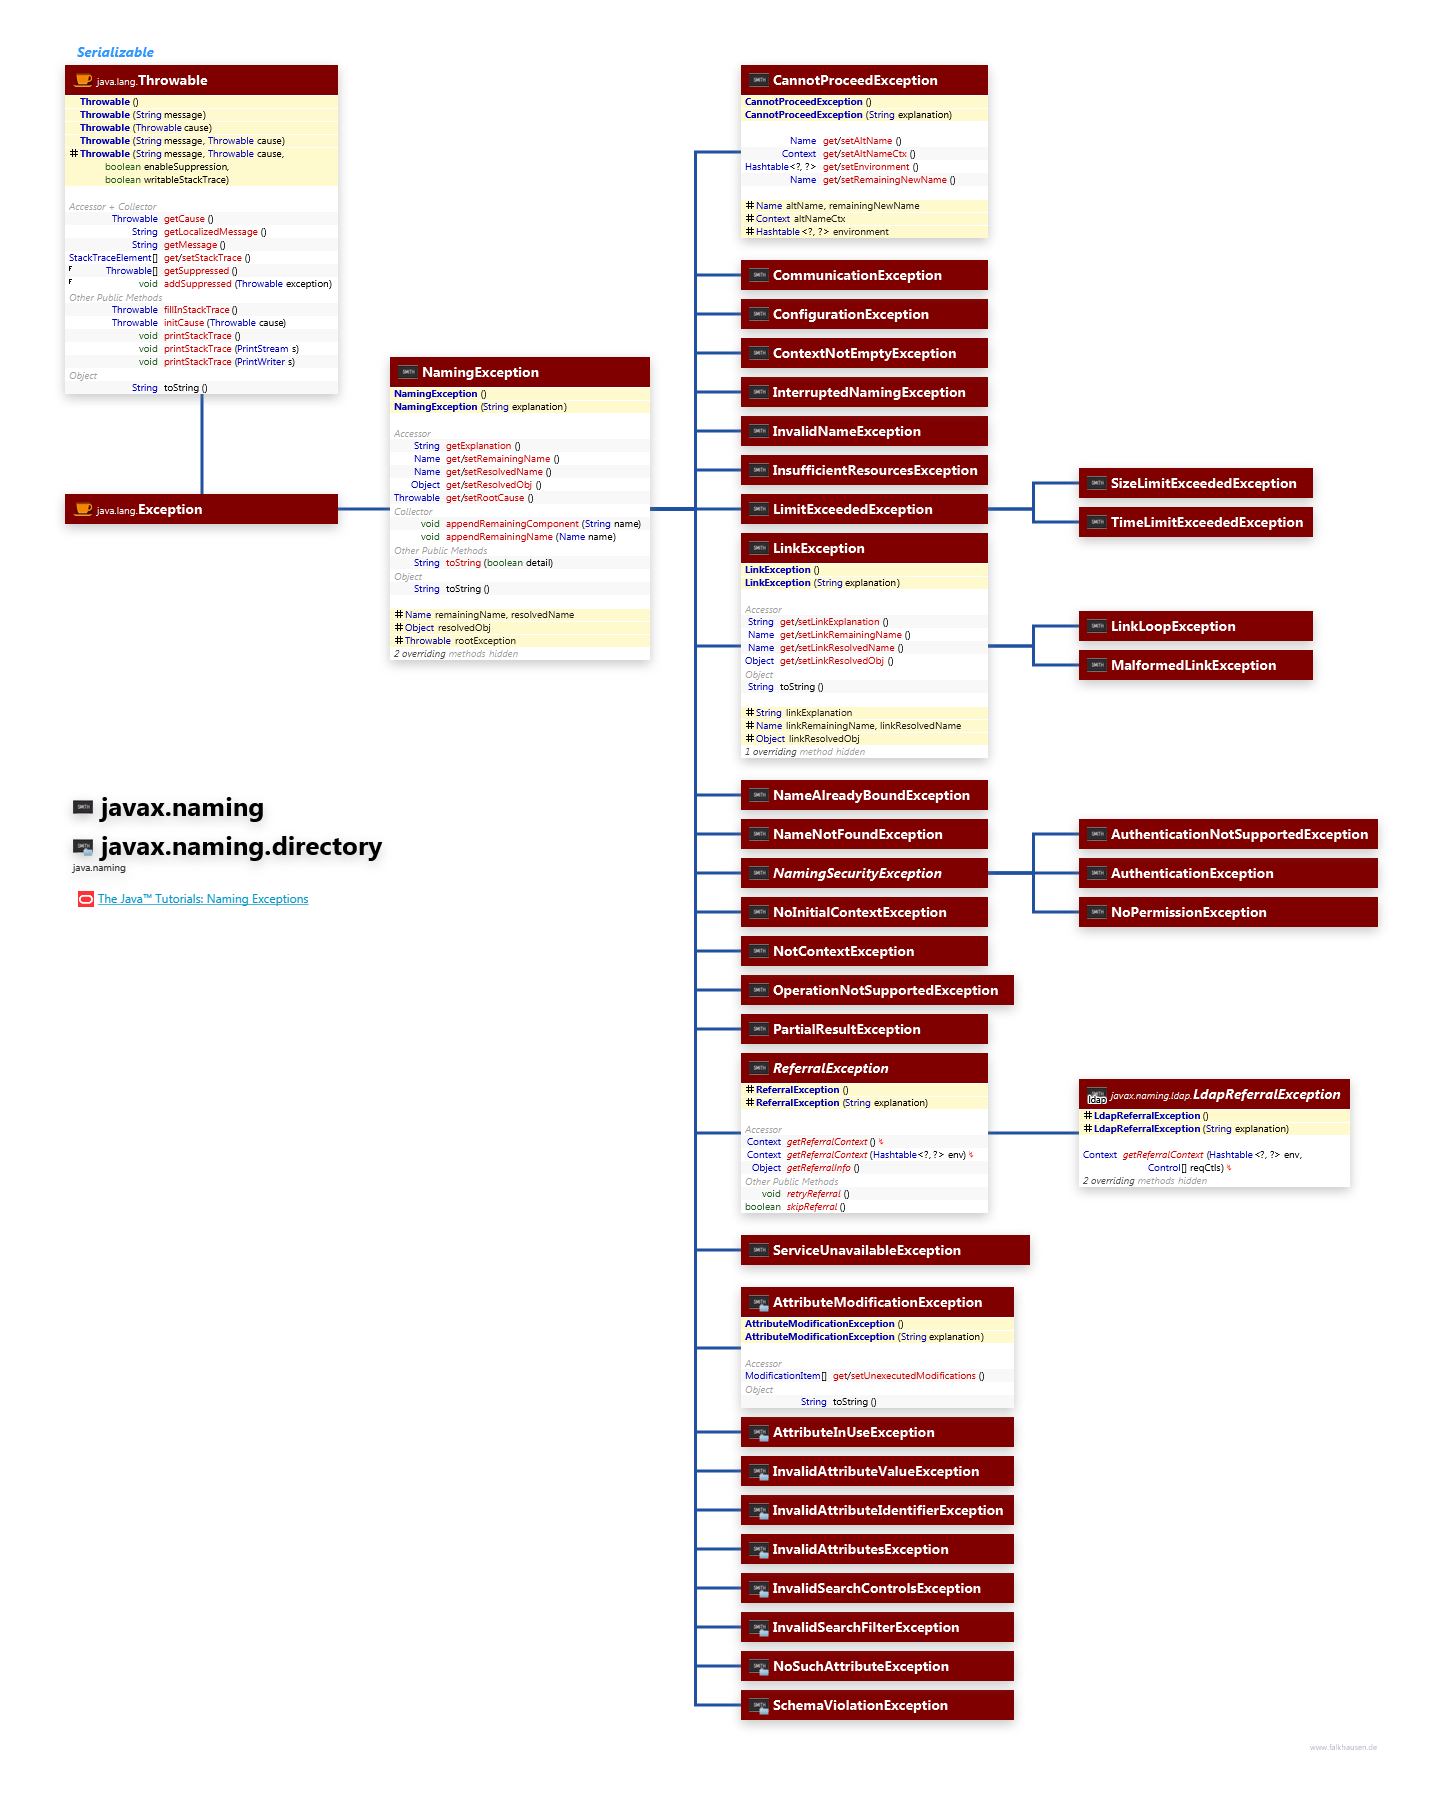 javax.naming javax.naming.directory Exceptions class diagram and api documentation for Java 10